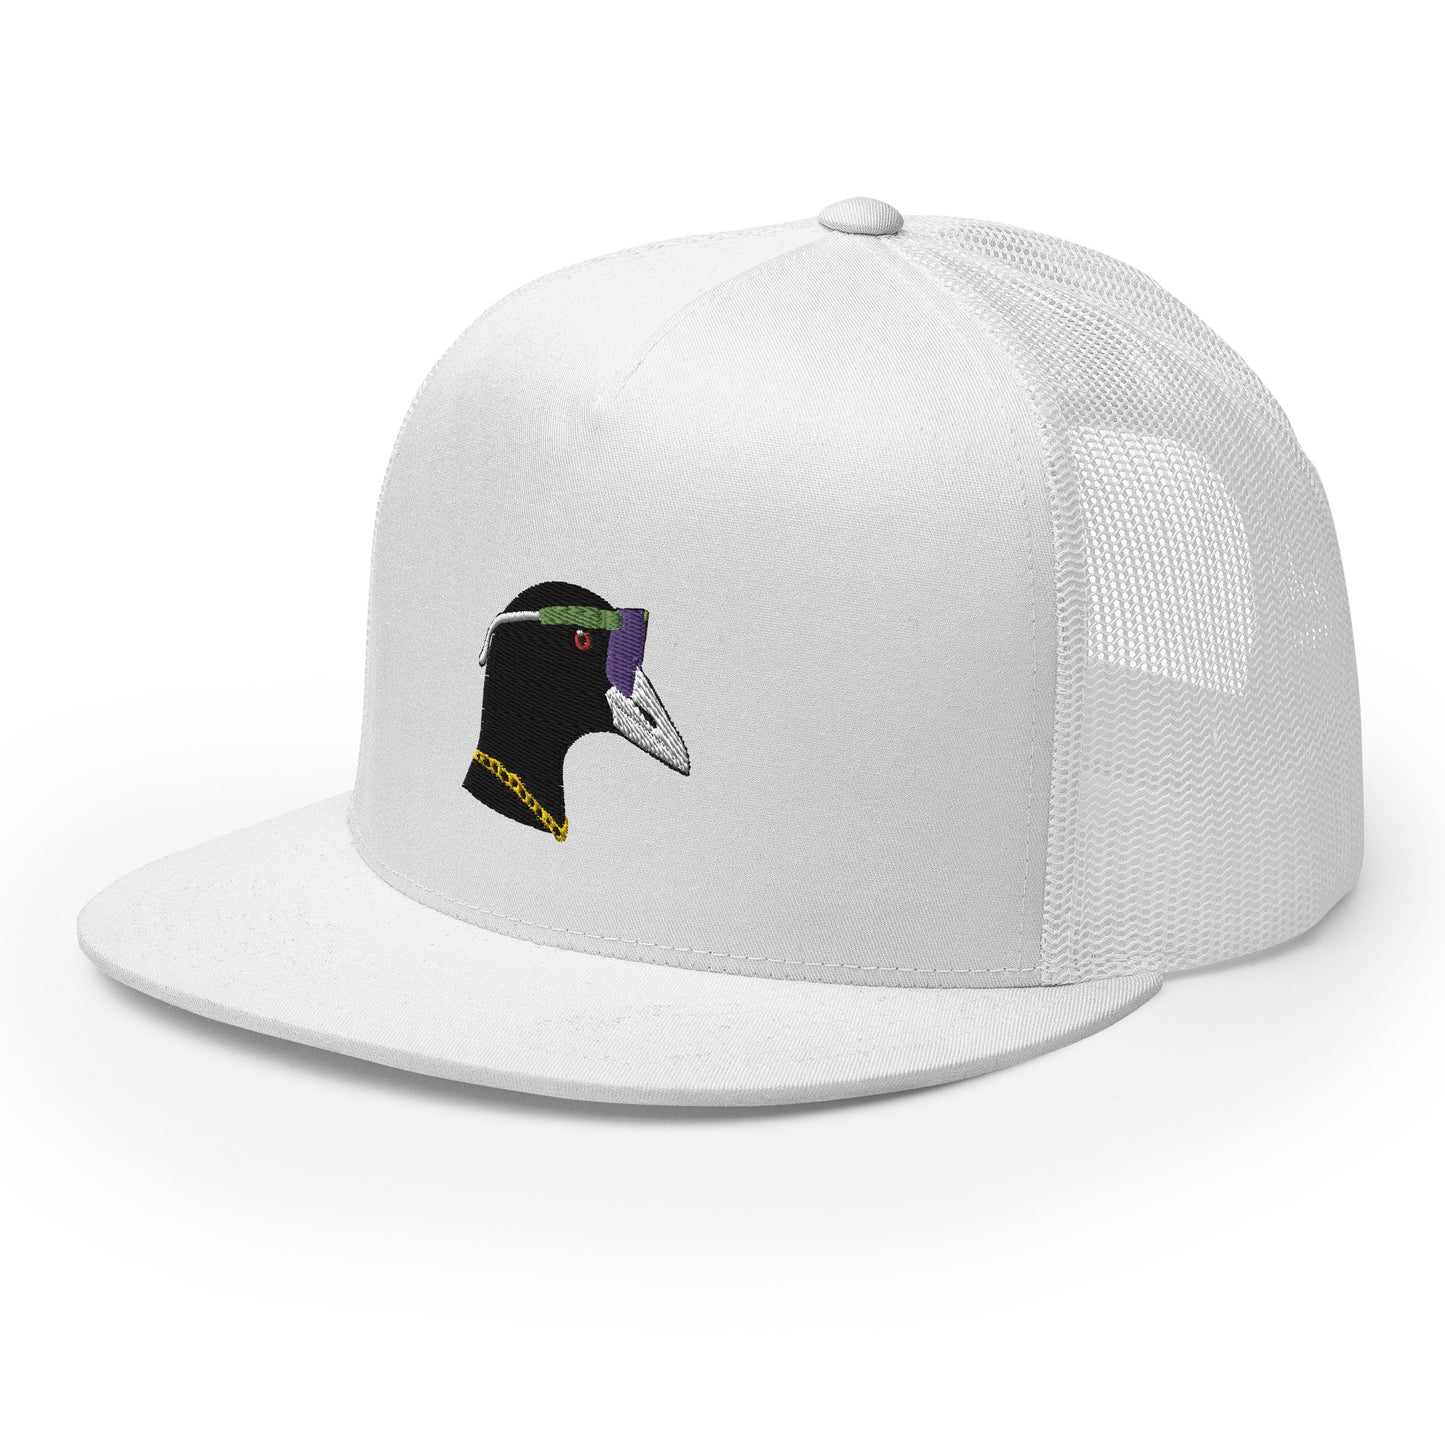 Coot Smacka Flat Bill (4 Colors Available)